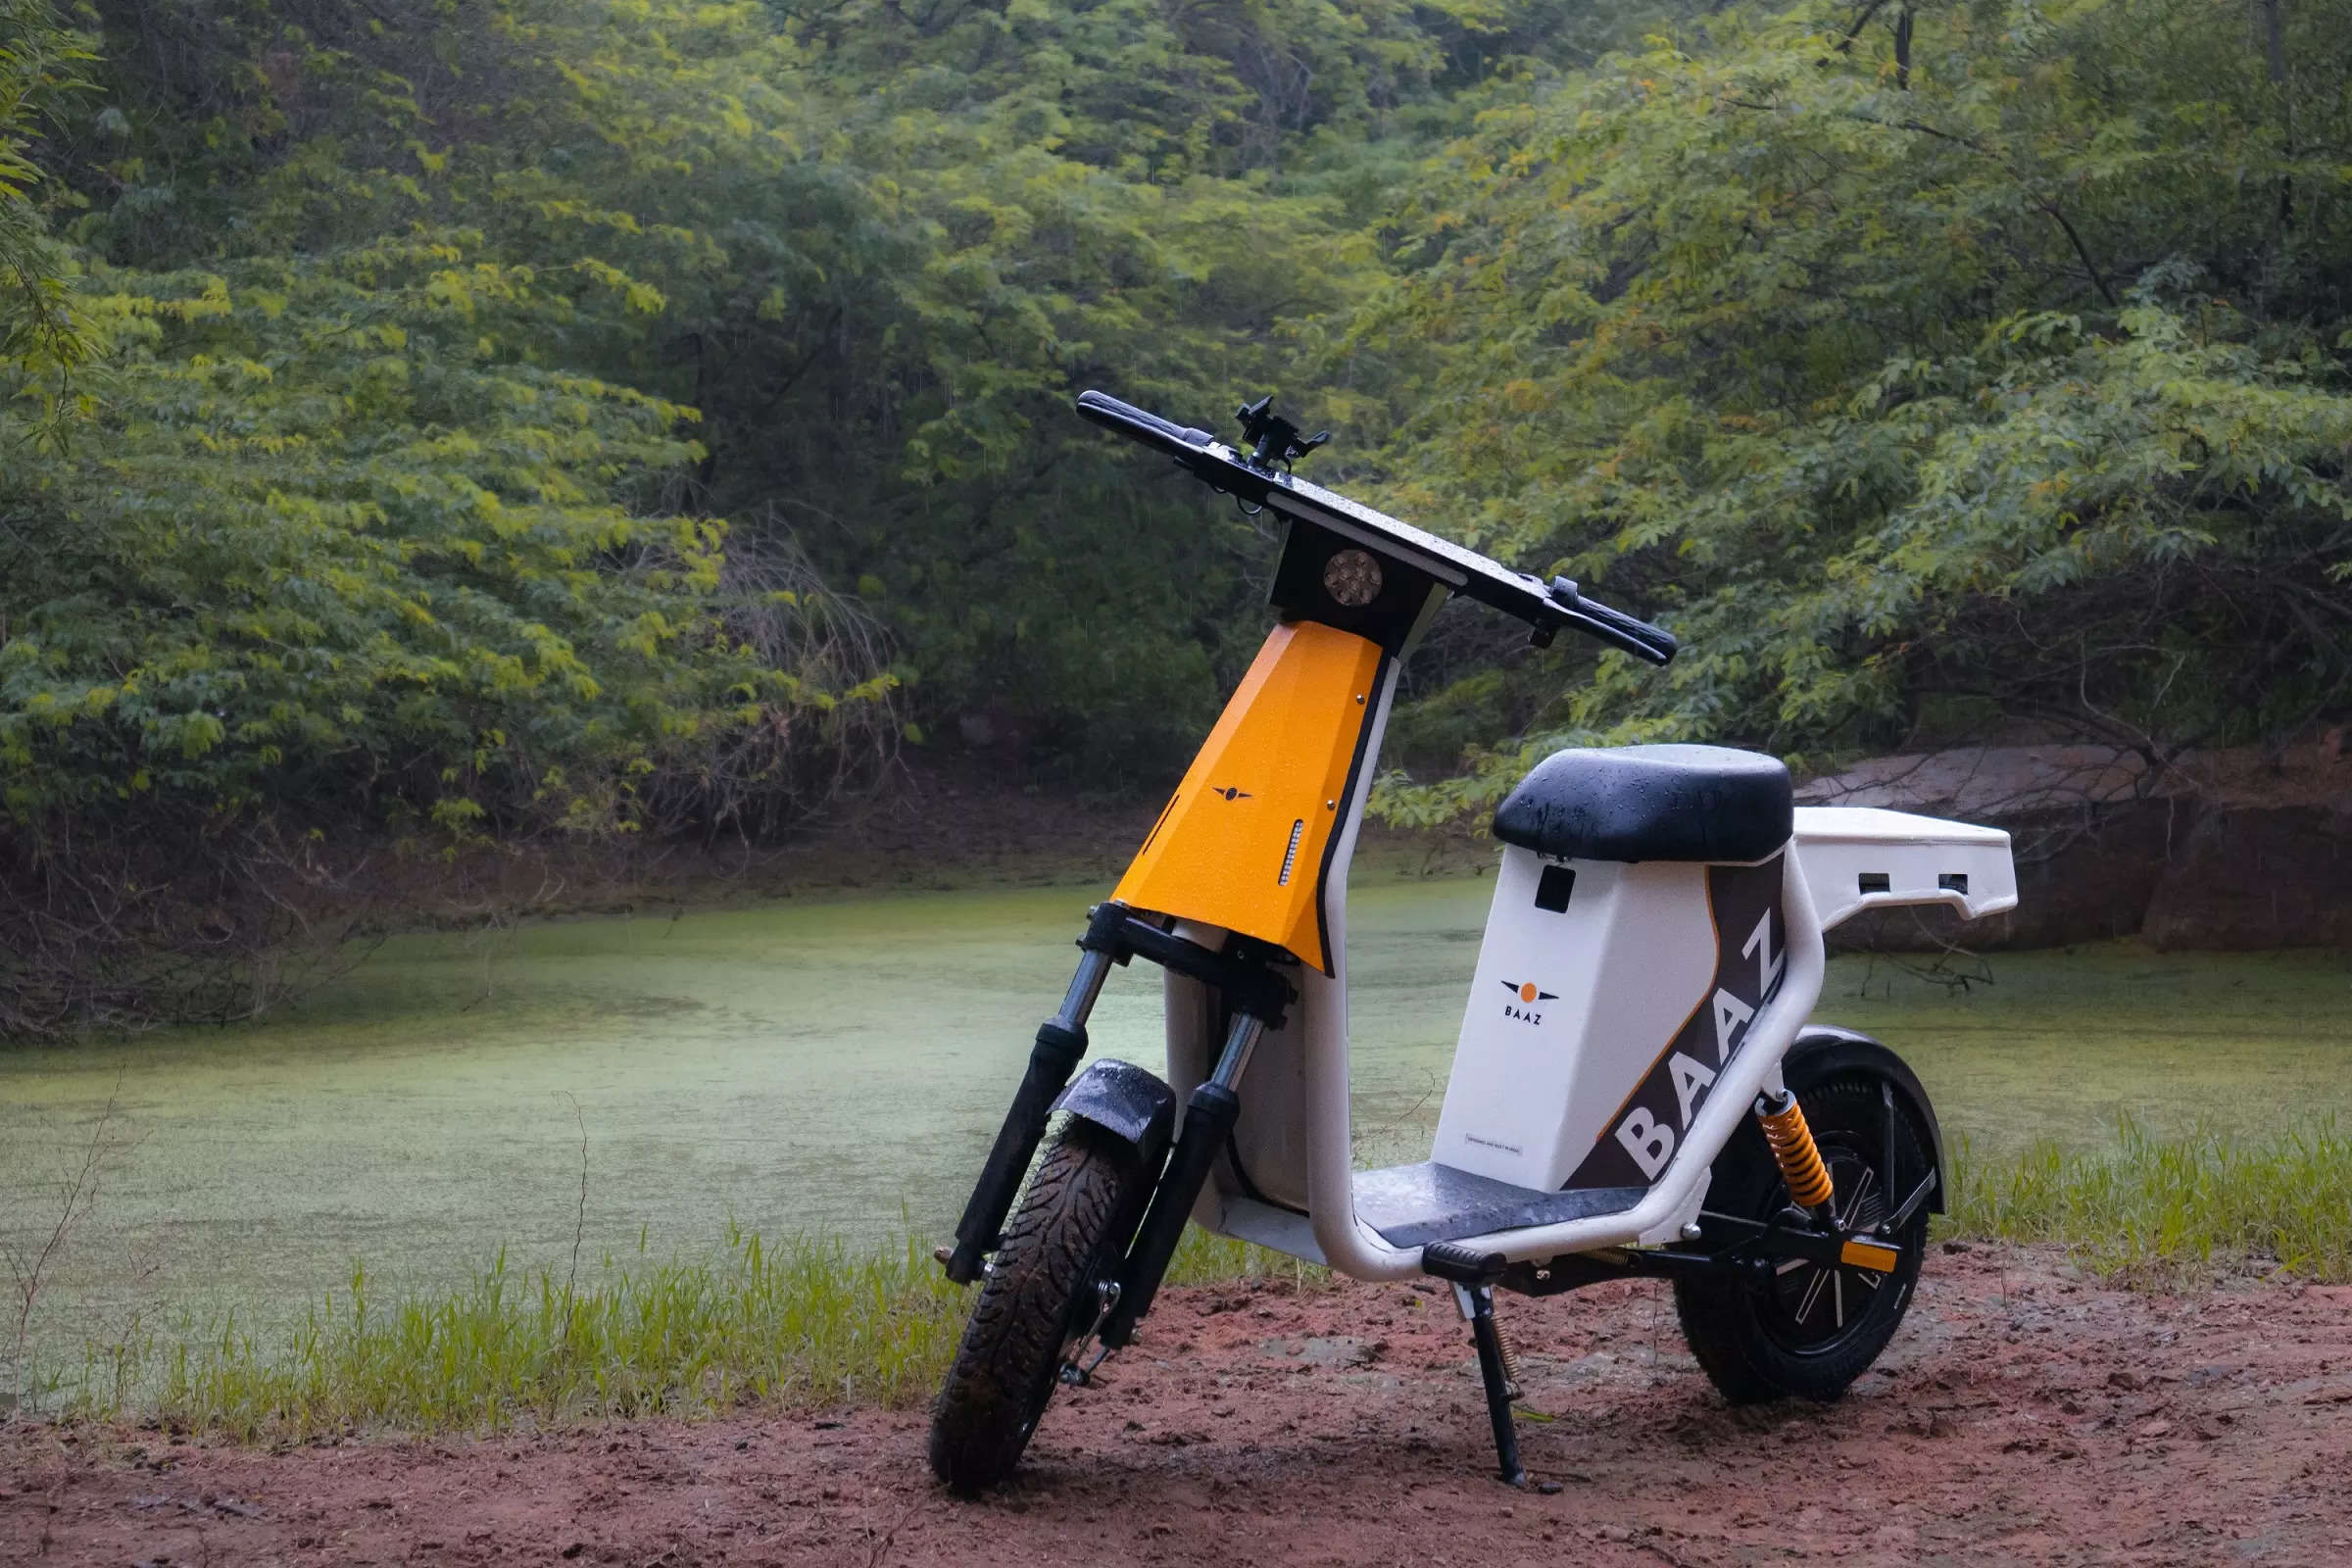  Baaz will sell these scooters to small-scale dealerships where gig delivery riders can rent them, empowering micro-entrepreneurs in line with the vision of ‘Local for Vocal’. 